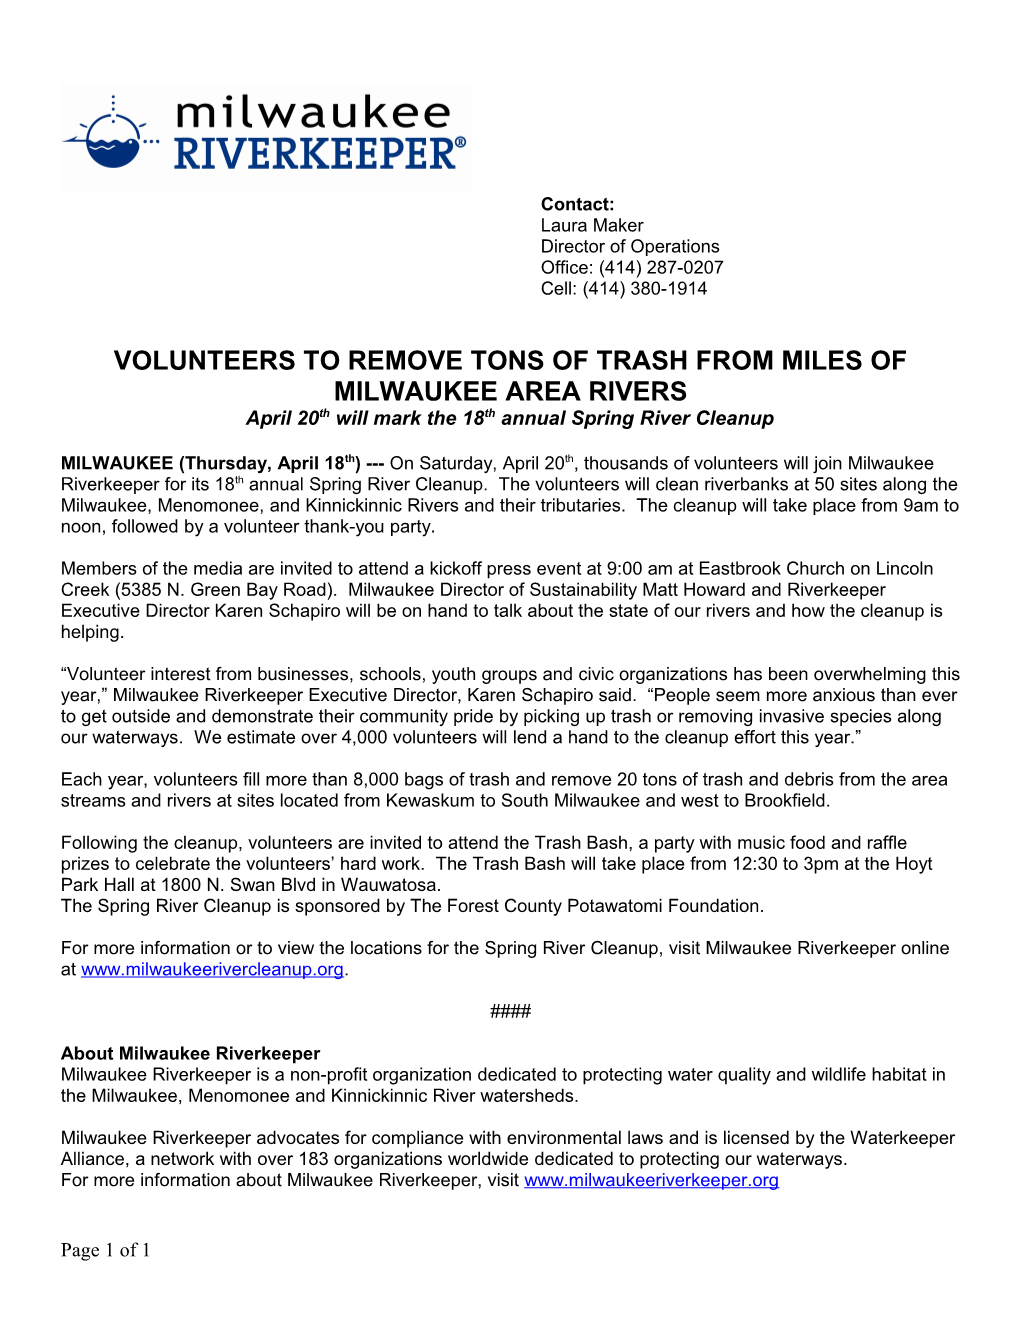 Volunteers to Remove Tons of Trashfrom Miles of Milwaukee Area Rivers